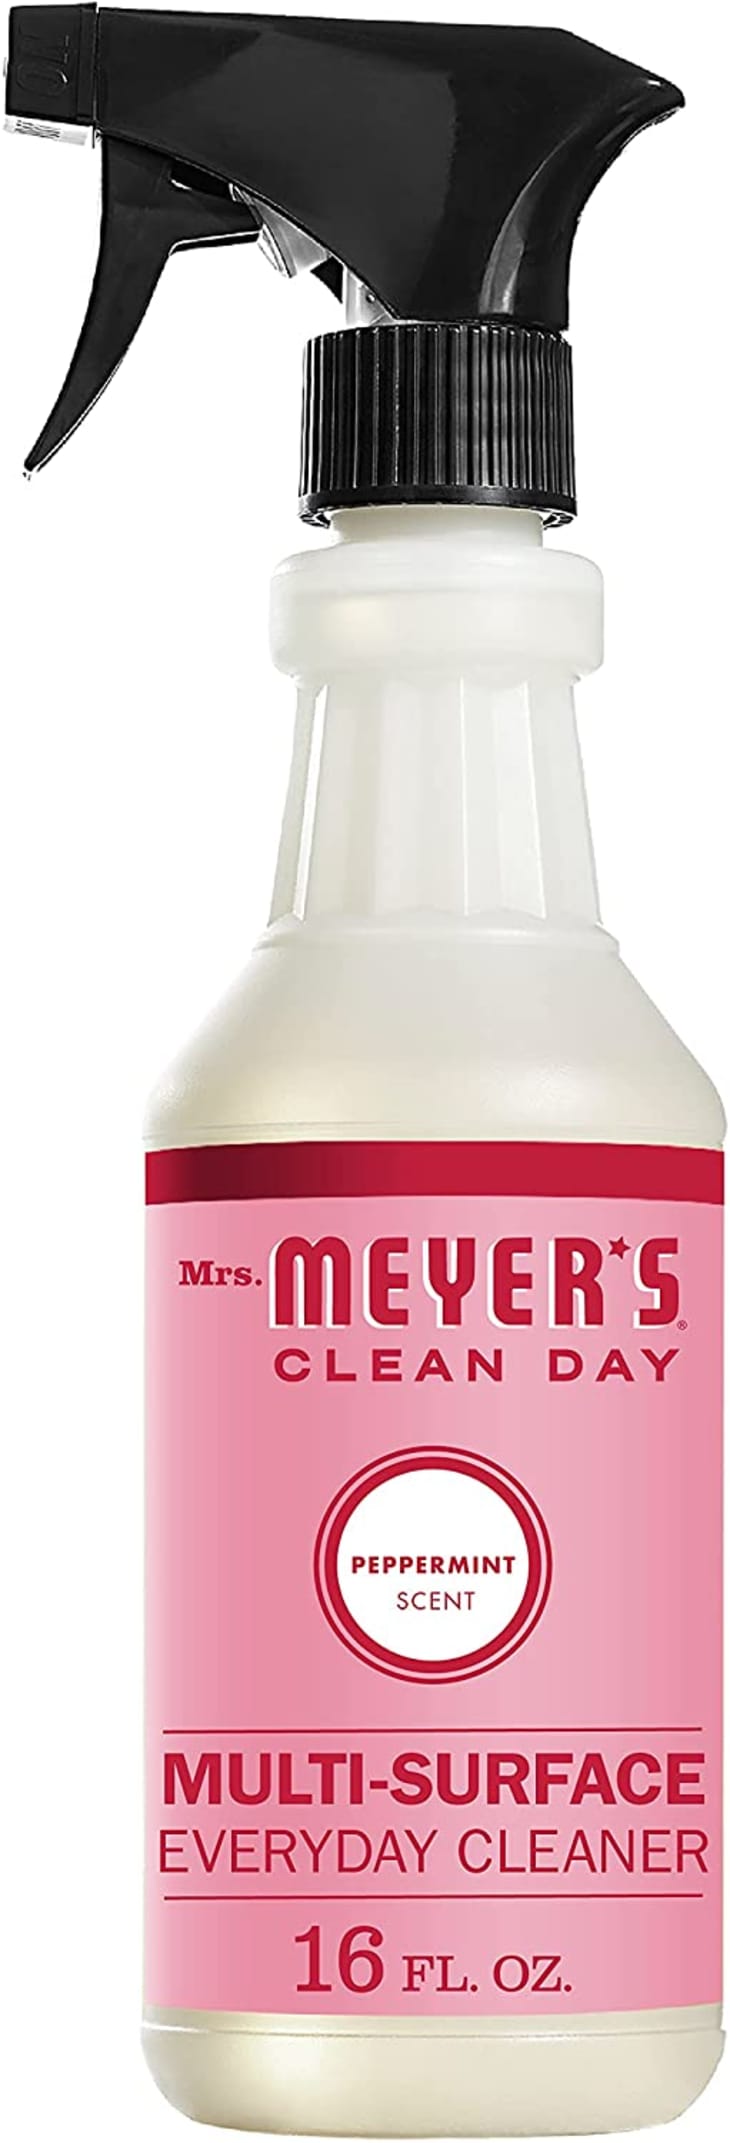 Mrs. Meyer's Clean Day Multi-Surface Cleaner Spray, Peppermint at Amazon